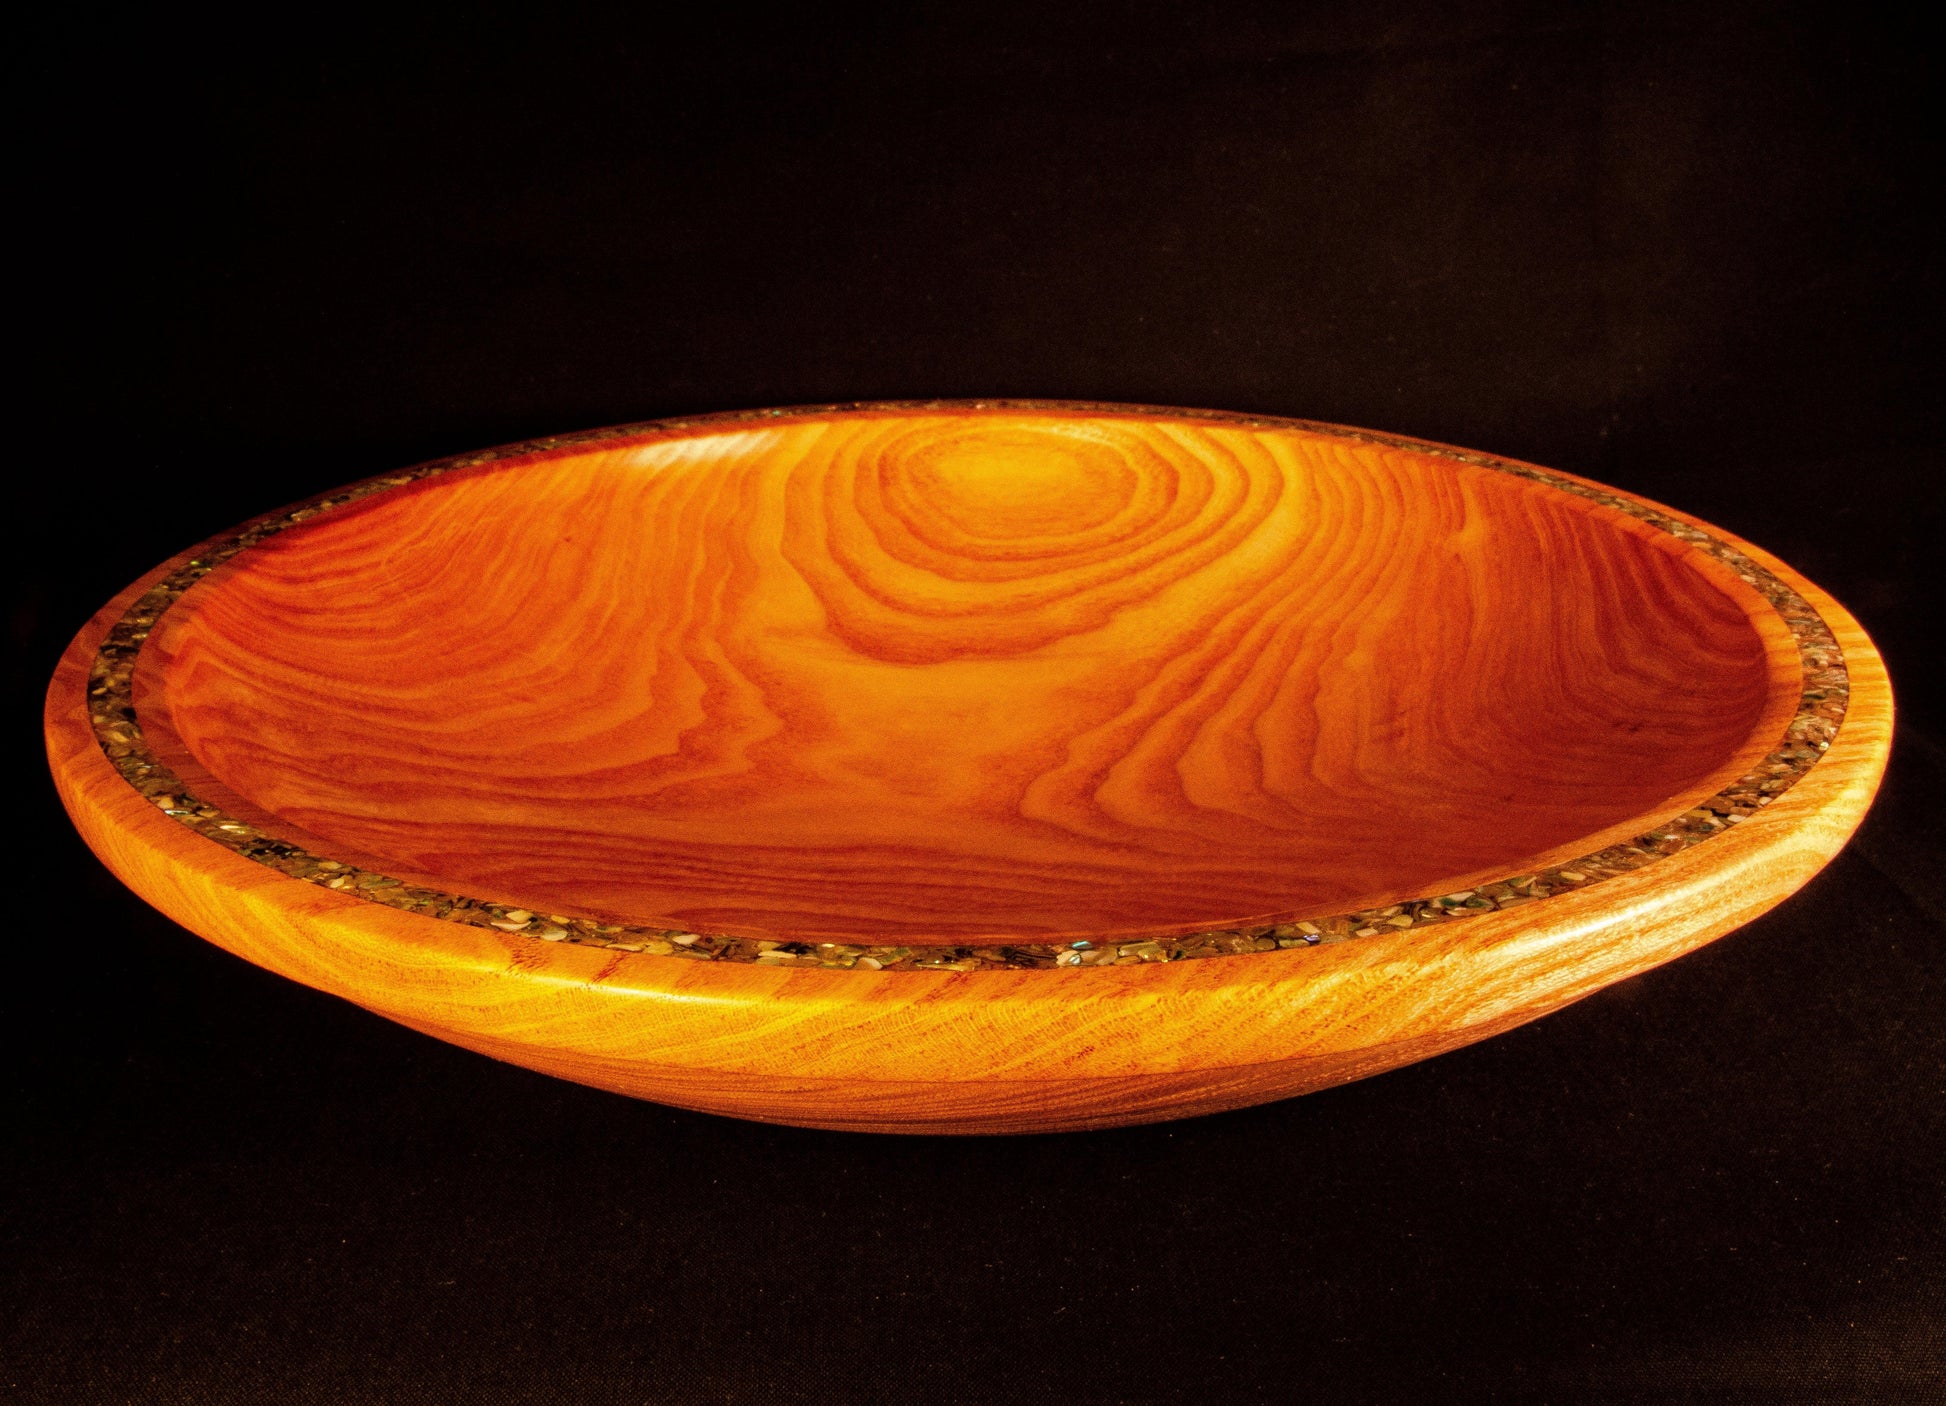 Honey Locust Platter. Dramatic edge feature with abalone shell adds sparkle to a strongly figured platter.